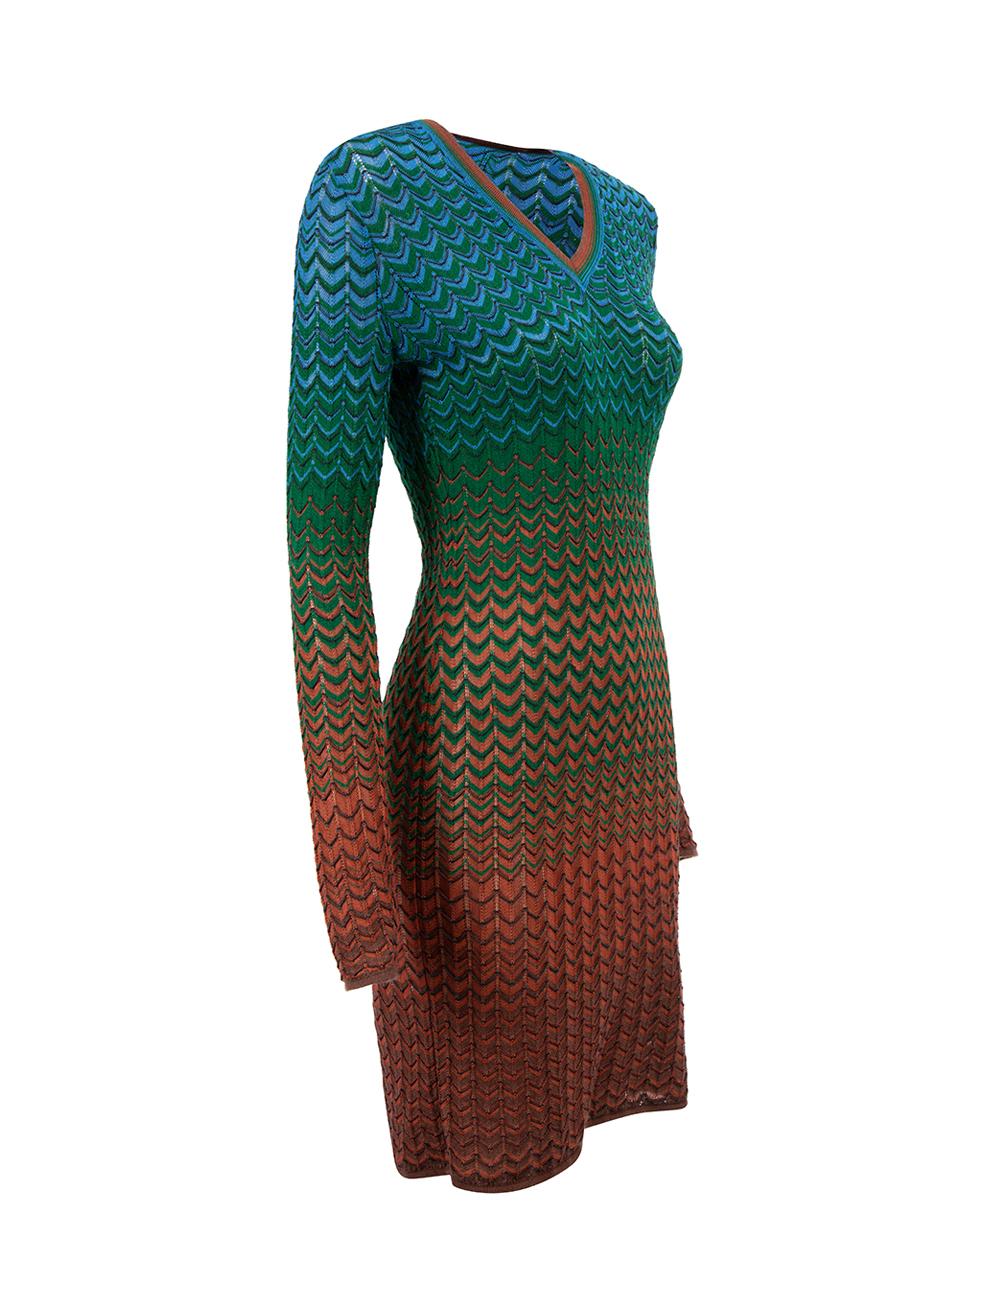 CONDITION is Very good. Minimal wear to dress is evident. Minimal wear to the left sleeve with a pull to the weave on this used M Missoni designer resale item.



Details


Multicolour

Synthetic

Knee length dress

Knitted and stretchy

Zig zag